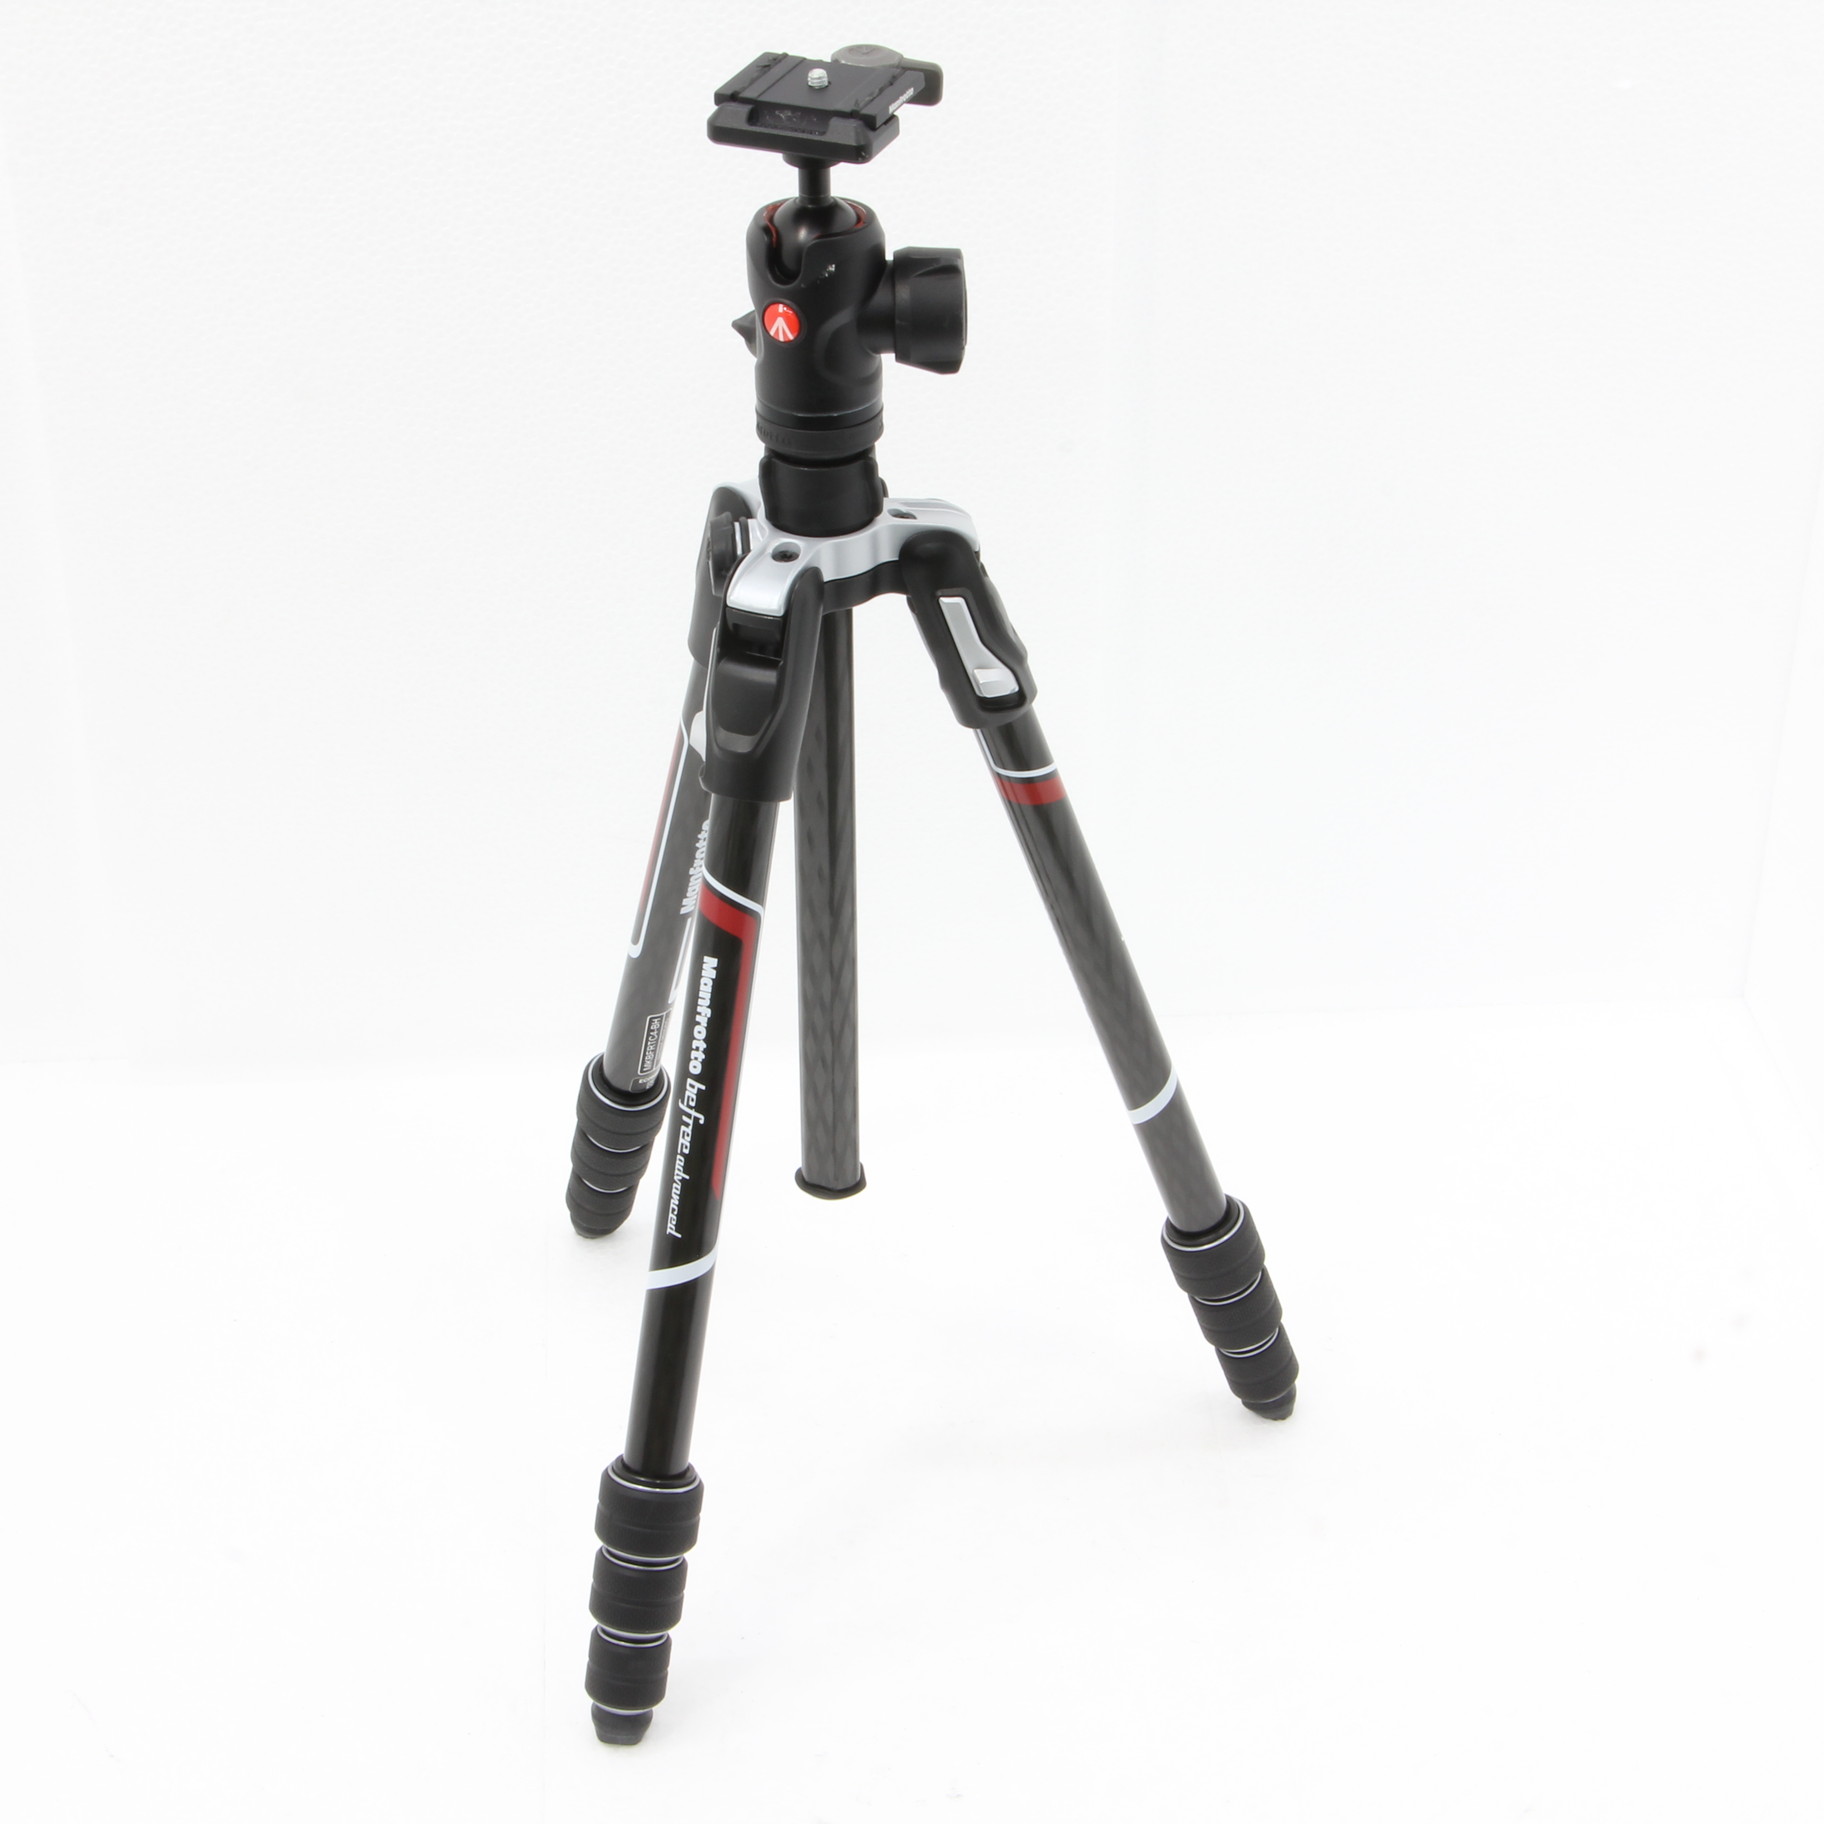 Manfrotto befreeアドバンス カーボン三脚 MKBFRTC4-BH-